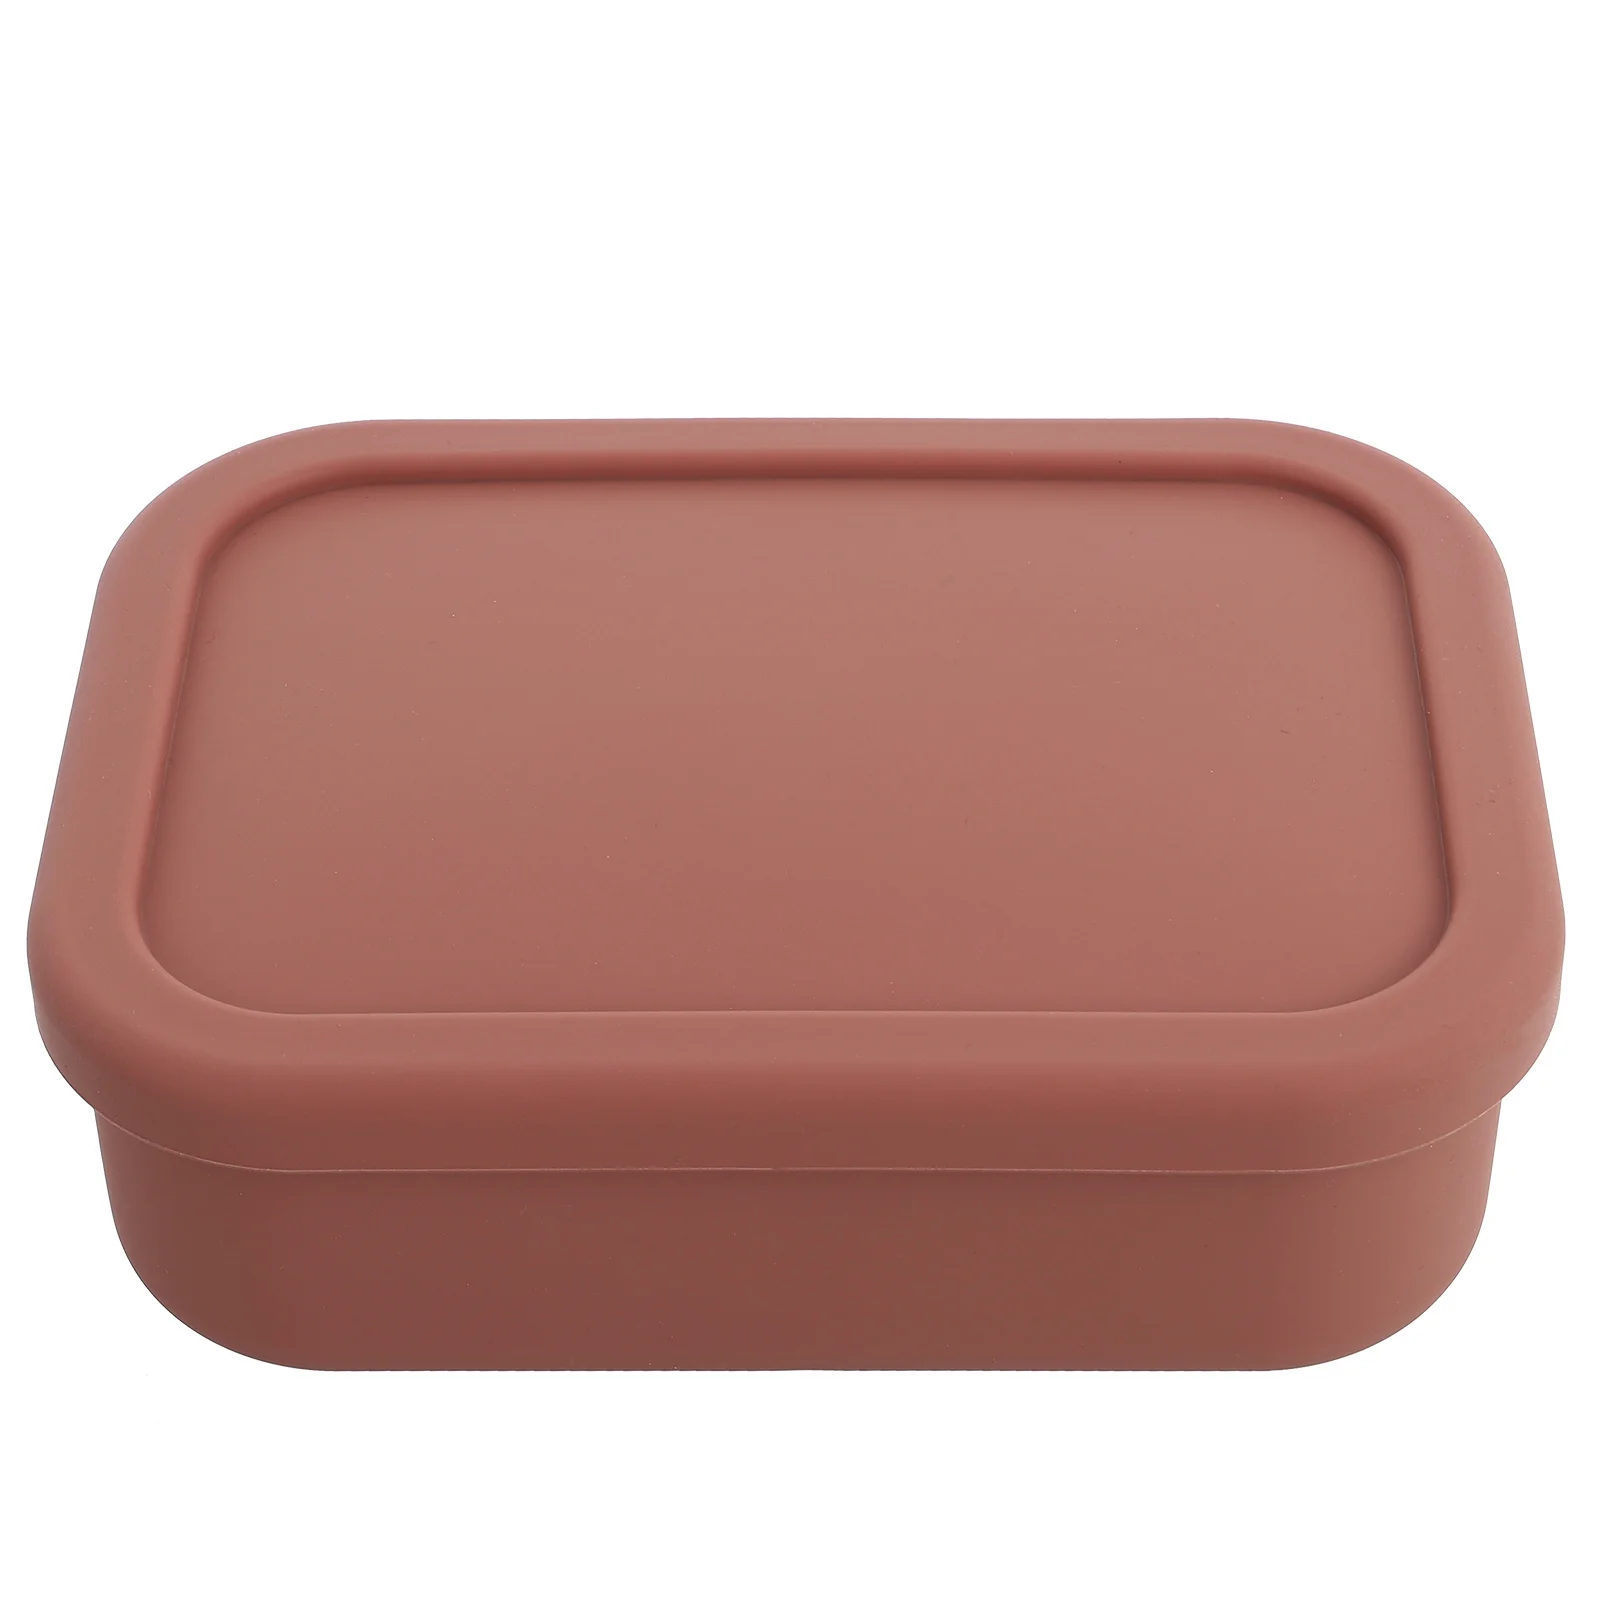 

Box Lunch Bento Container Kids Silicone Boxes Containers Meal Prep Japanese Sushi Snack Compartment Bowl Divided Proof Leak